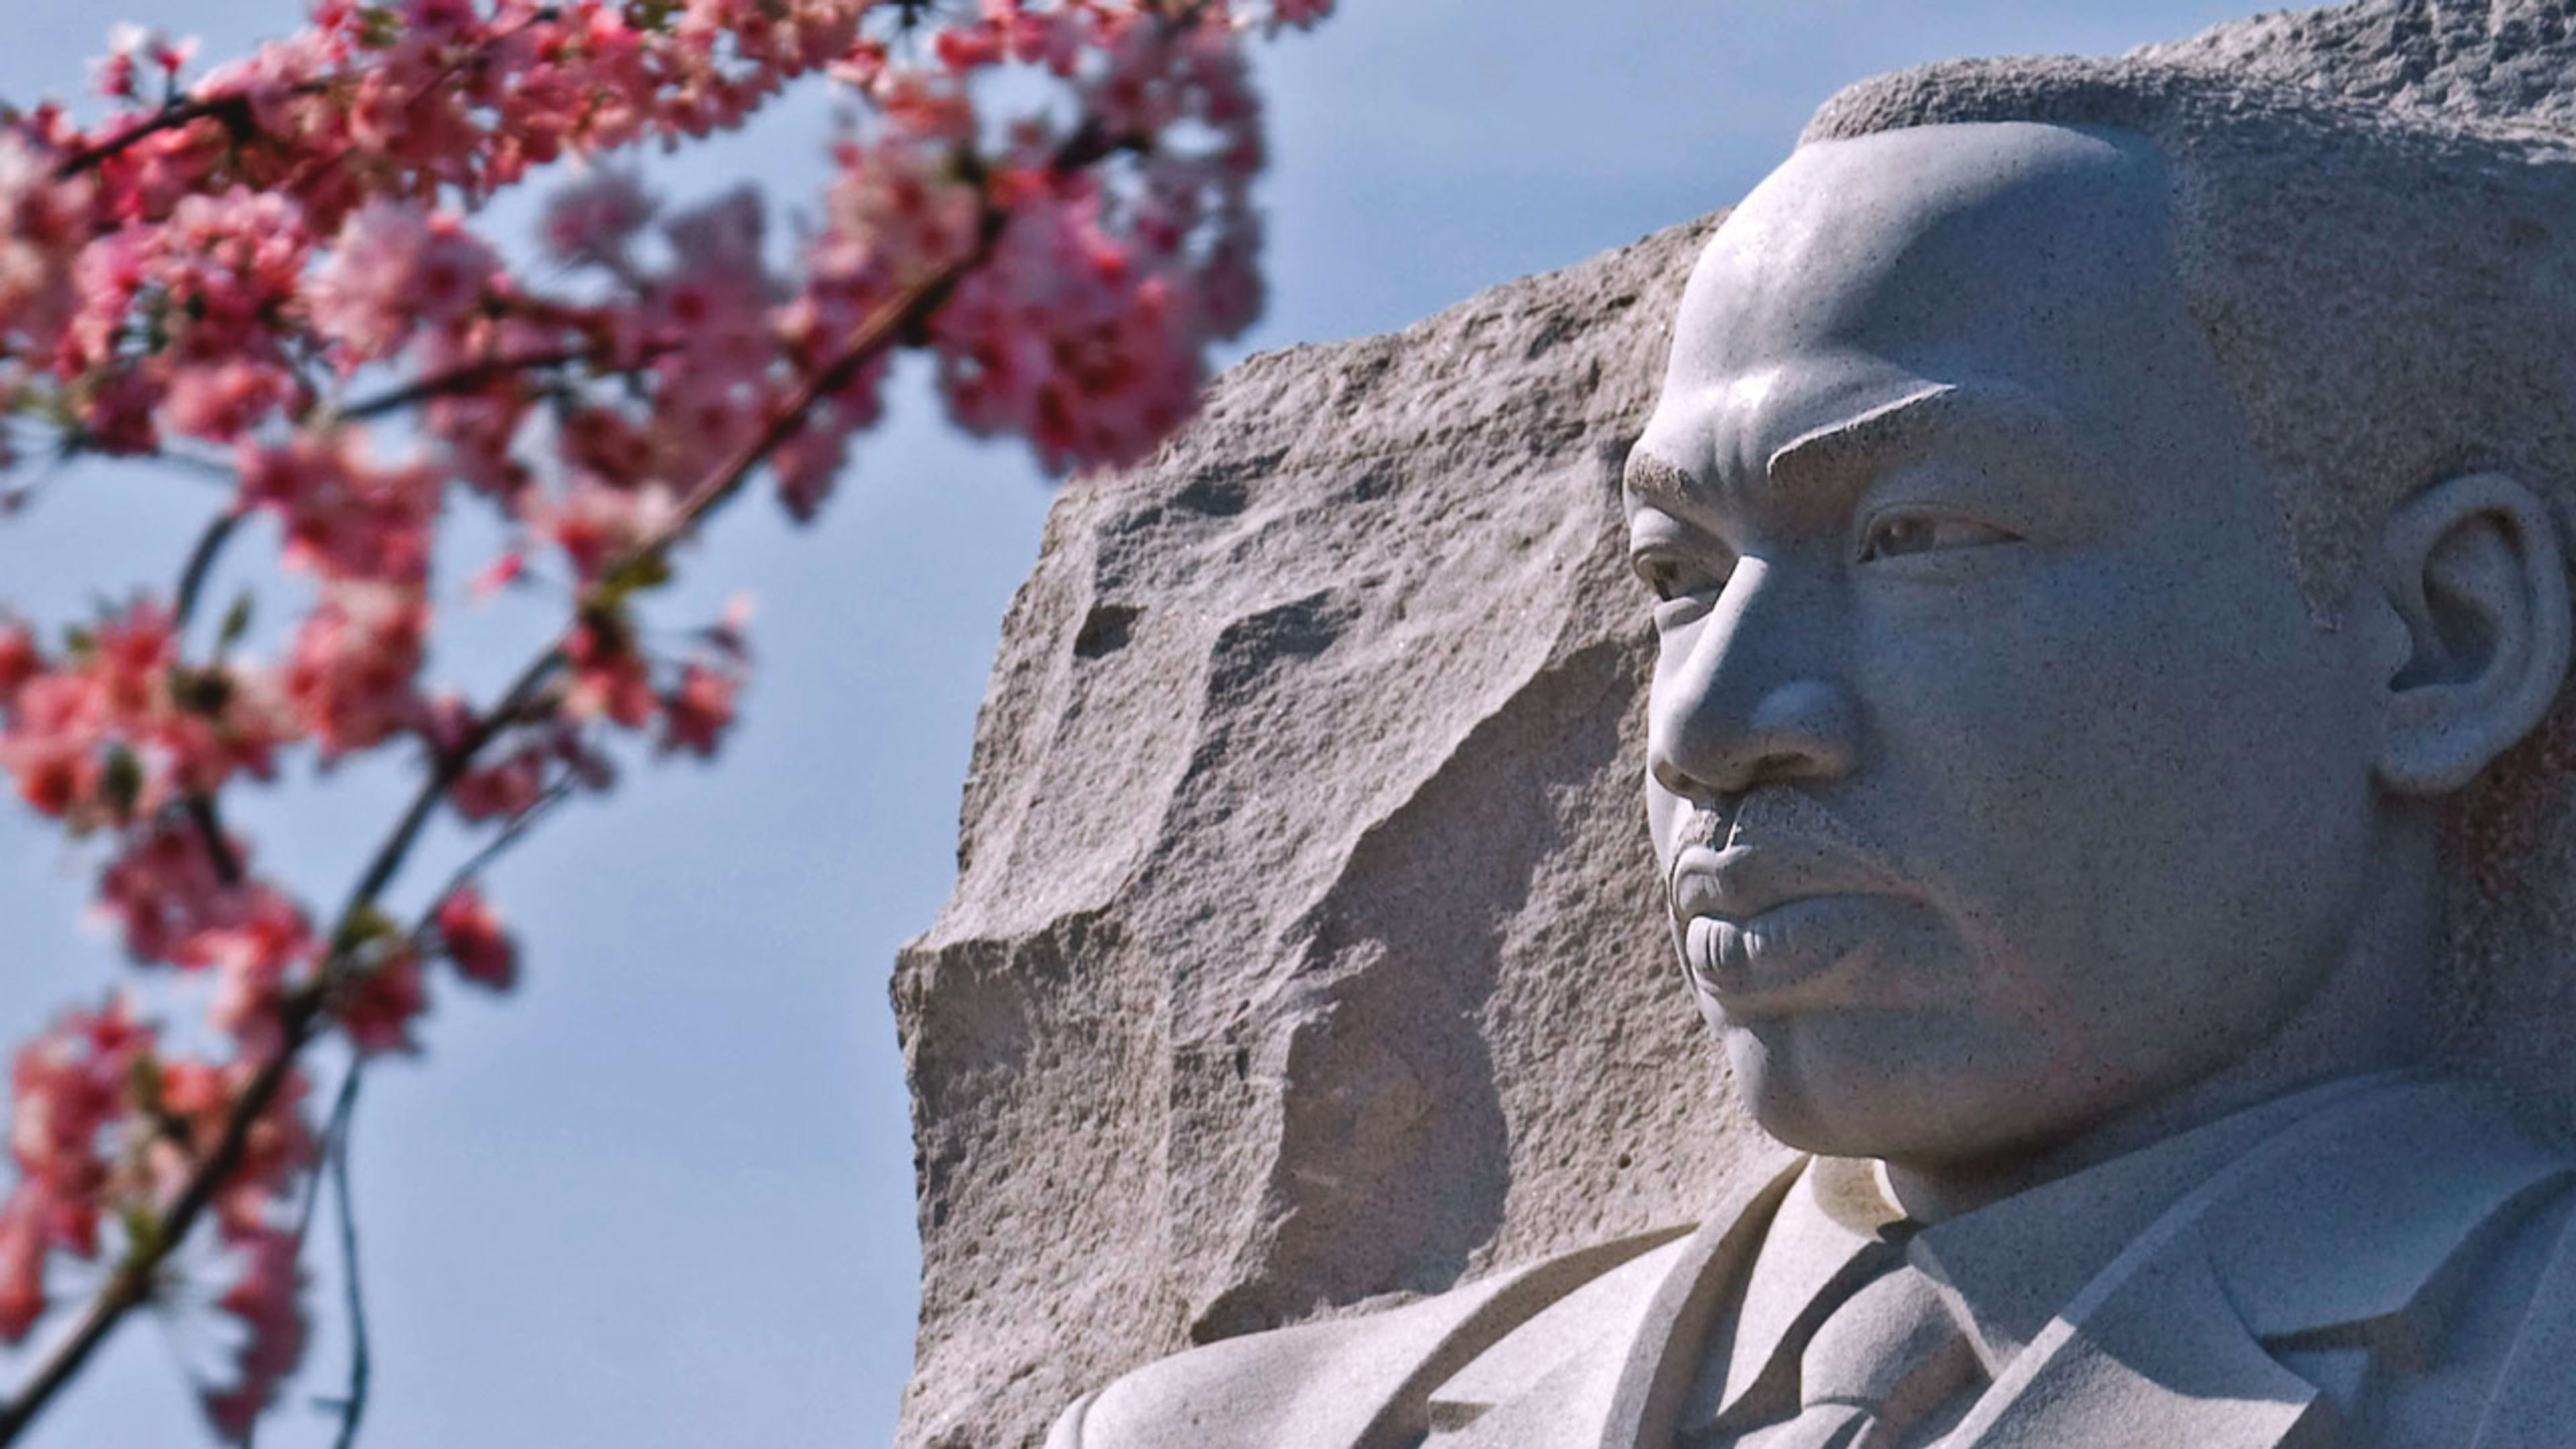 Why MLK’s vision of love as a moral imperative still matters